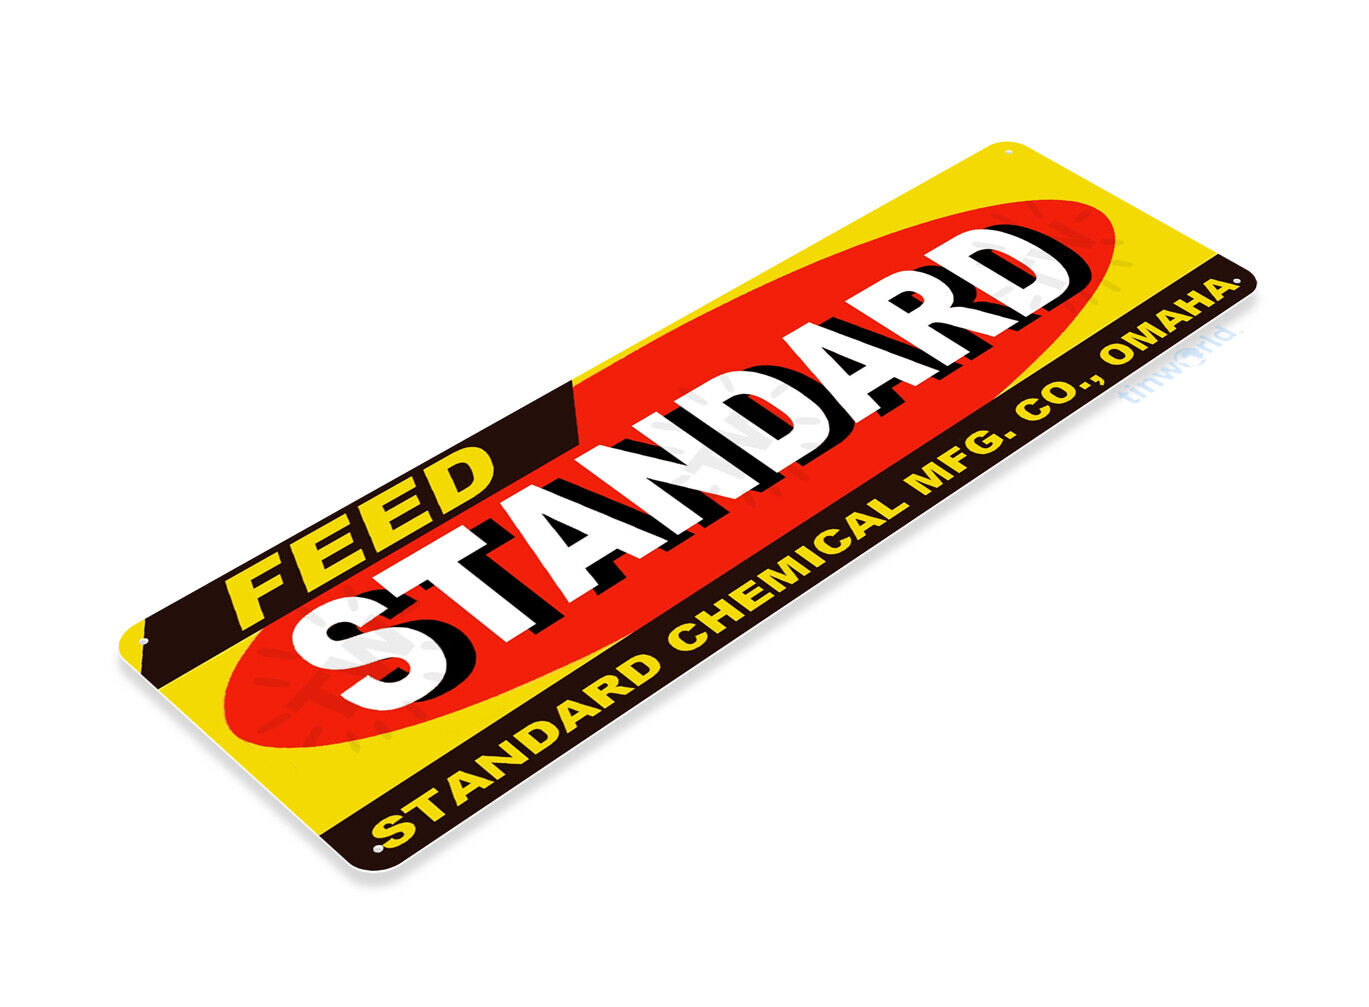 Standard Feed Retro Metal Sign 4 X 11 Inches